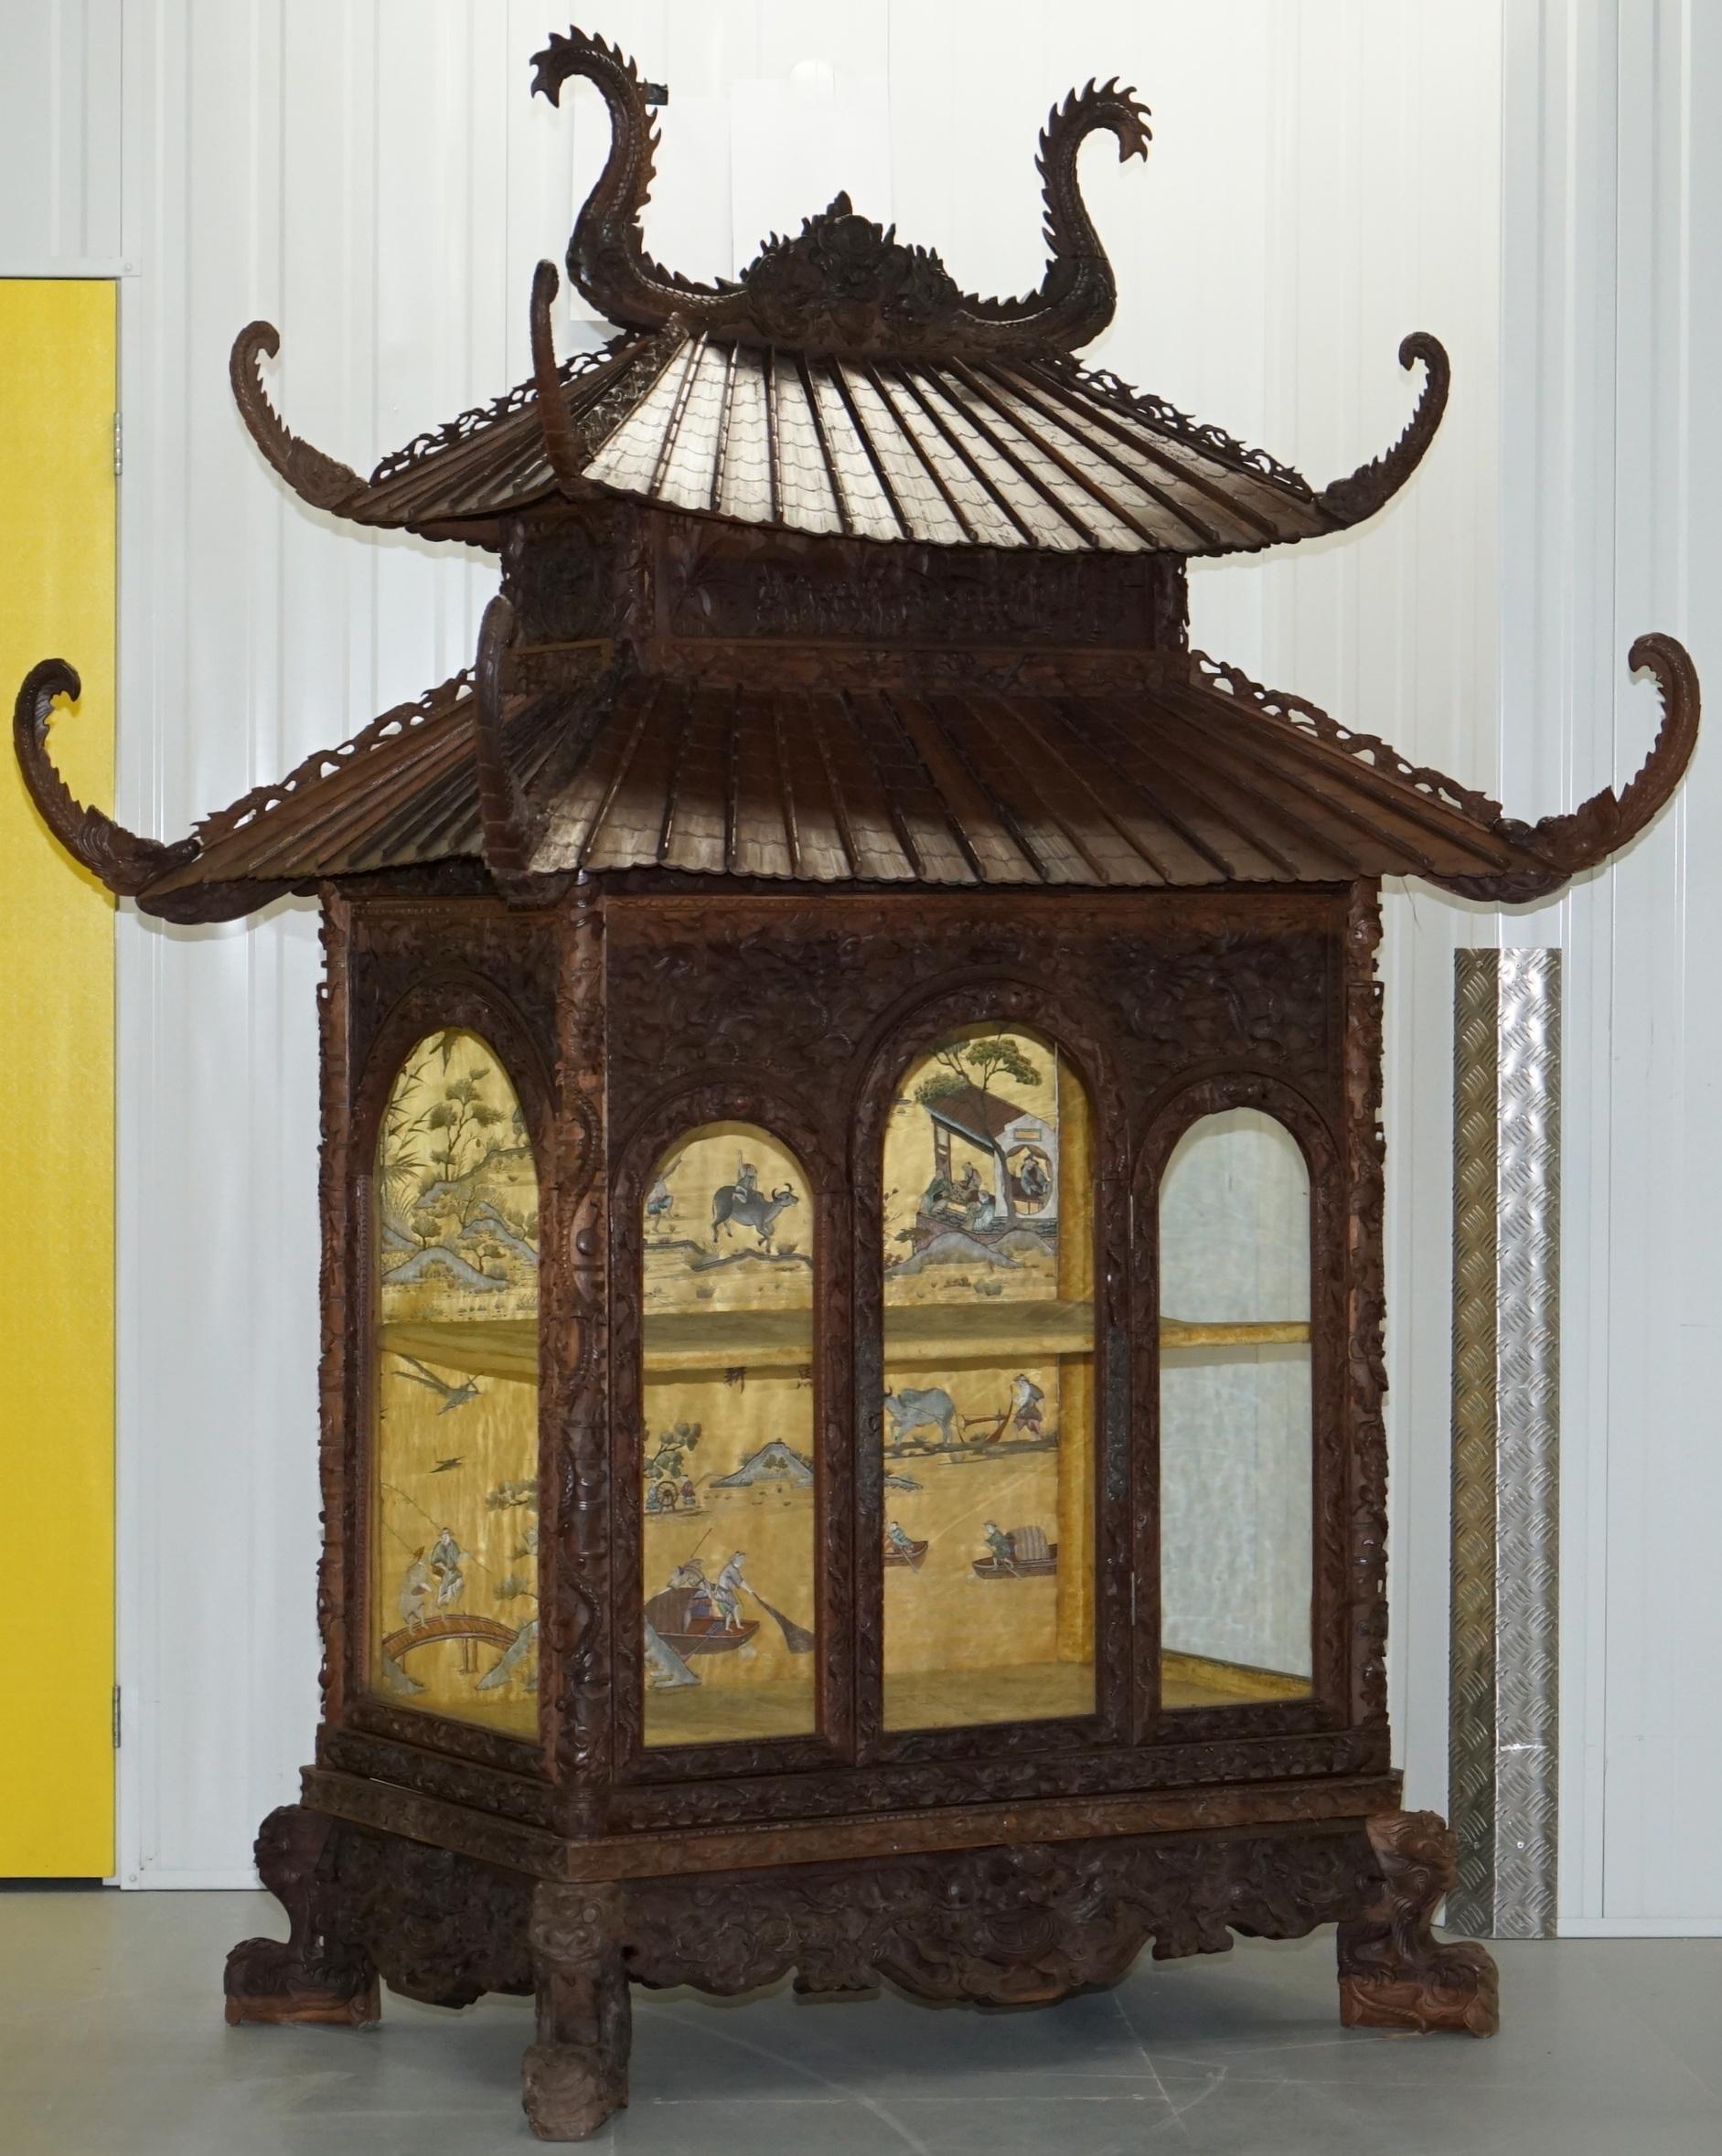 We are delighted to offer for sale this exceptionally rare antique Asian hand carved Pagoda cabinet with silk tapestry lining

There are some pieces of furniture that are so well made, elaborate and rare that you simply have to buy them, that’s